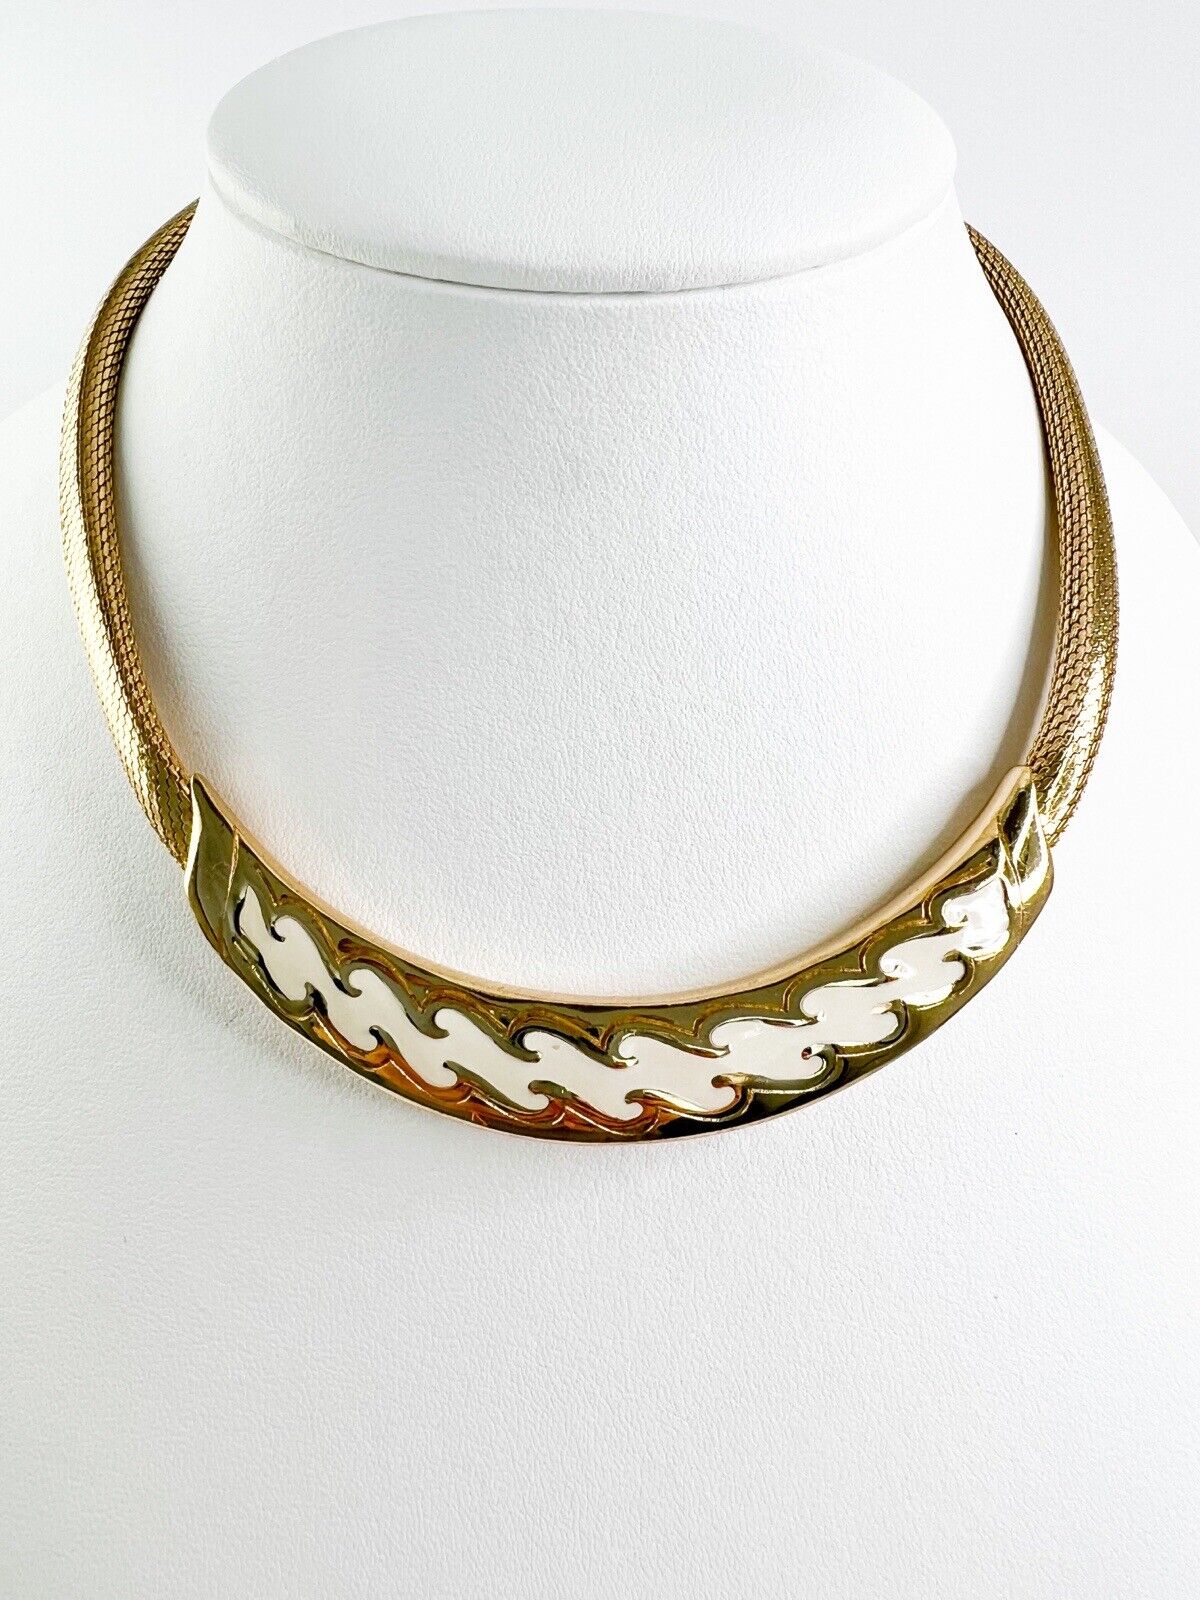 Vintage Christian Dior Necklace, Choker Necklace Gold, Vintage enamel necklace, Bridal Necklace, Charm Necklace, Jewelry for Women